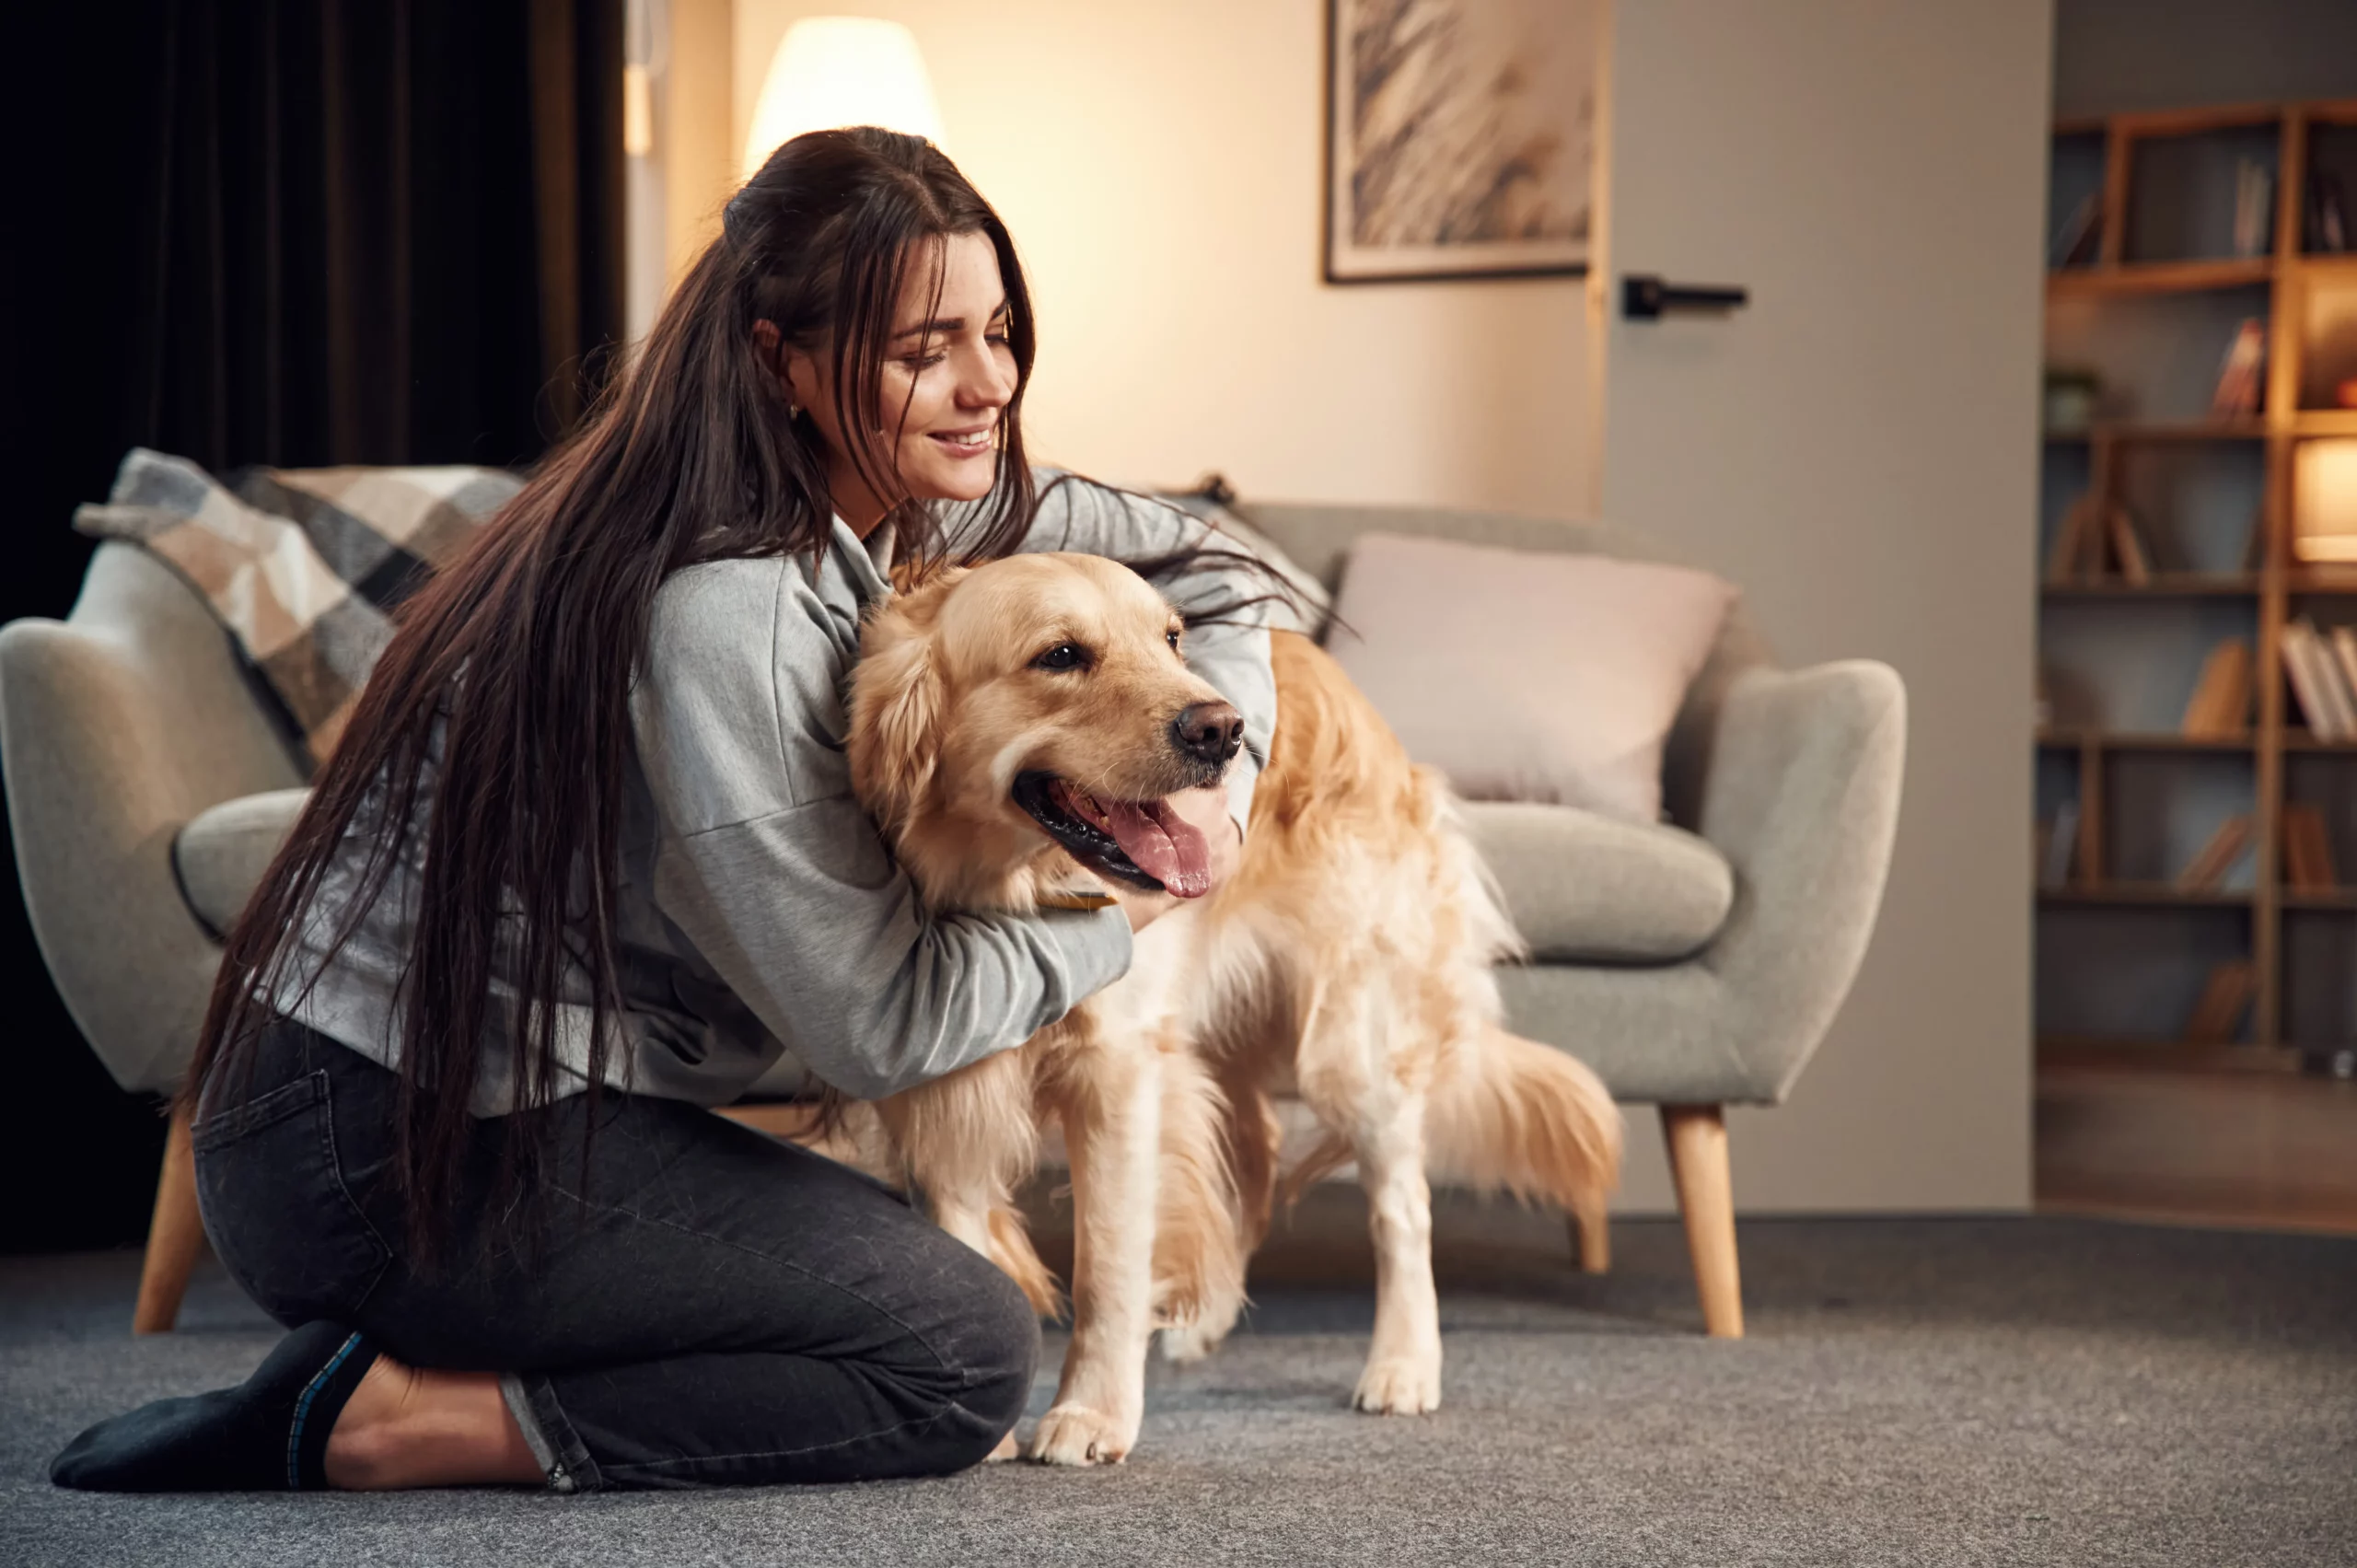 Daily Care for Dogs: 5 Easy Tips to Boost Canine Happiness